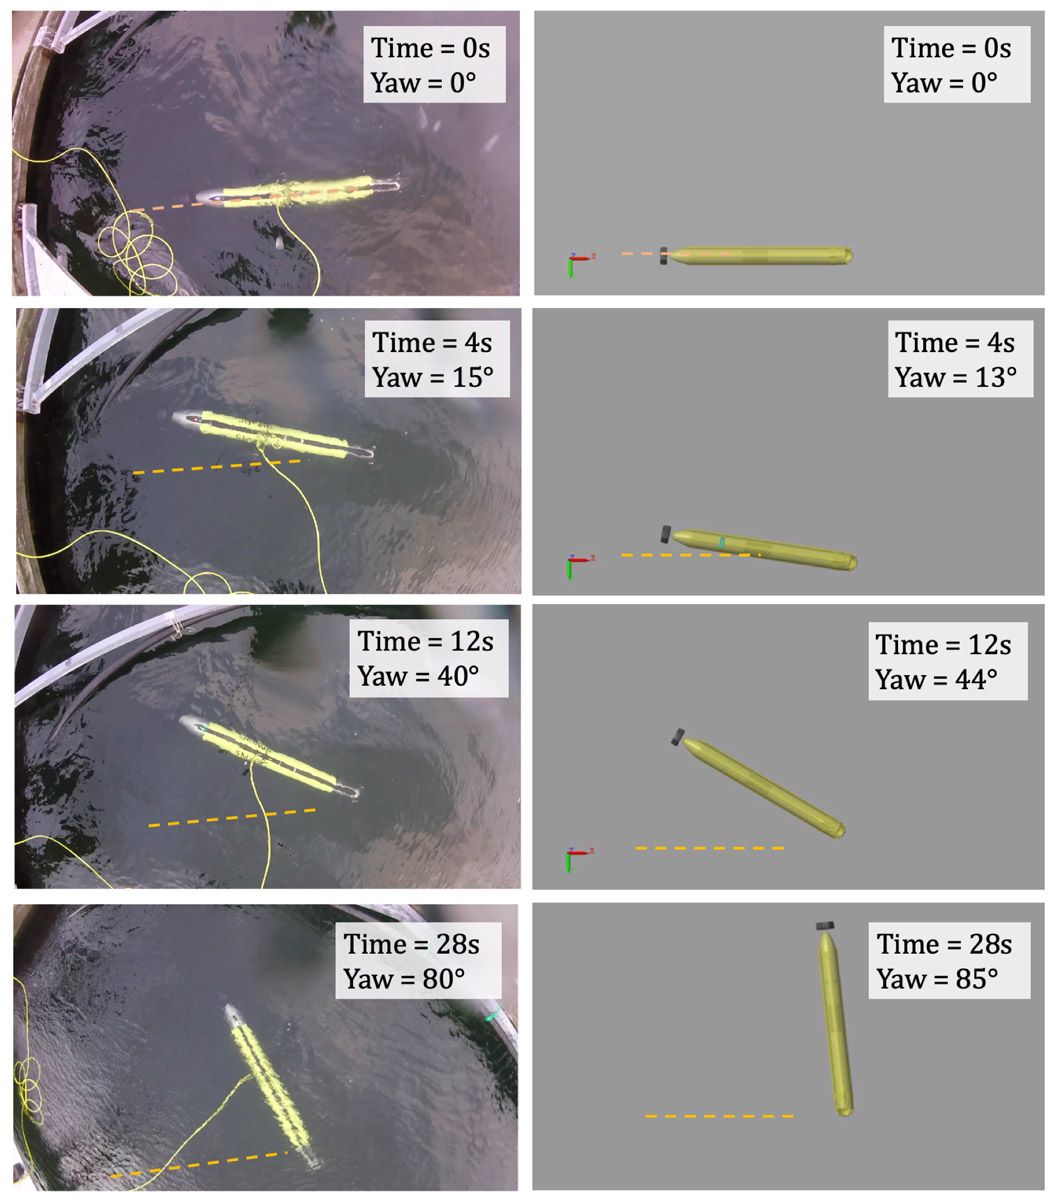 Side-by-side image series comparing SAM in a field test with the AUV in a corresponding simulation.